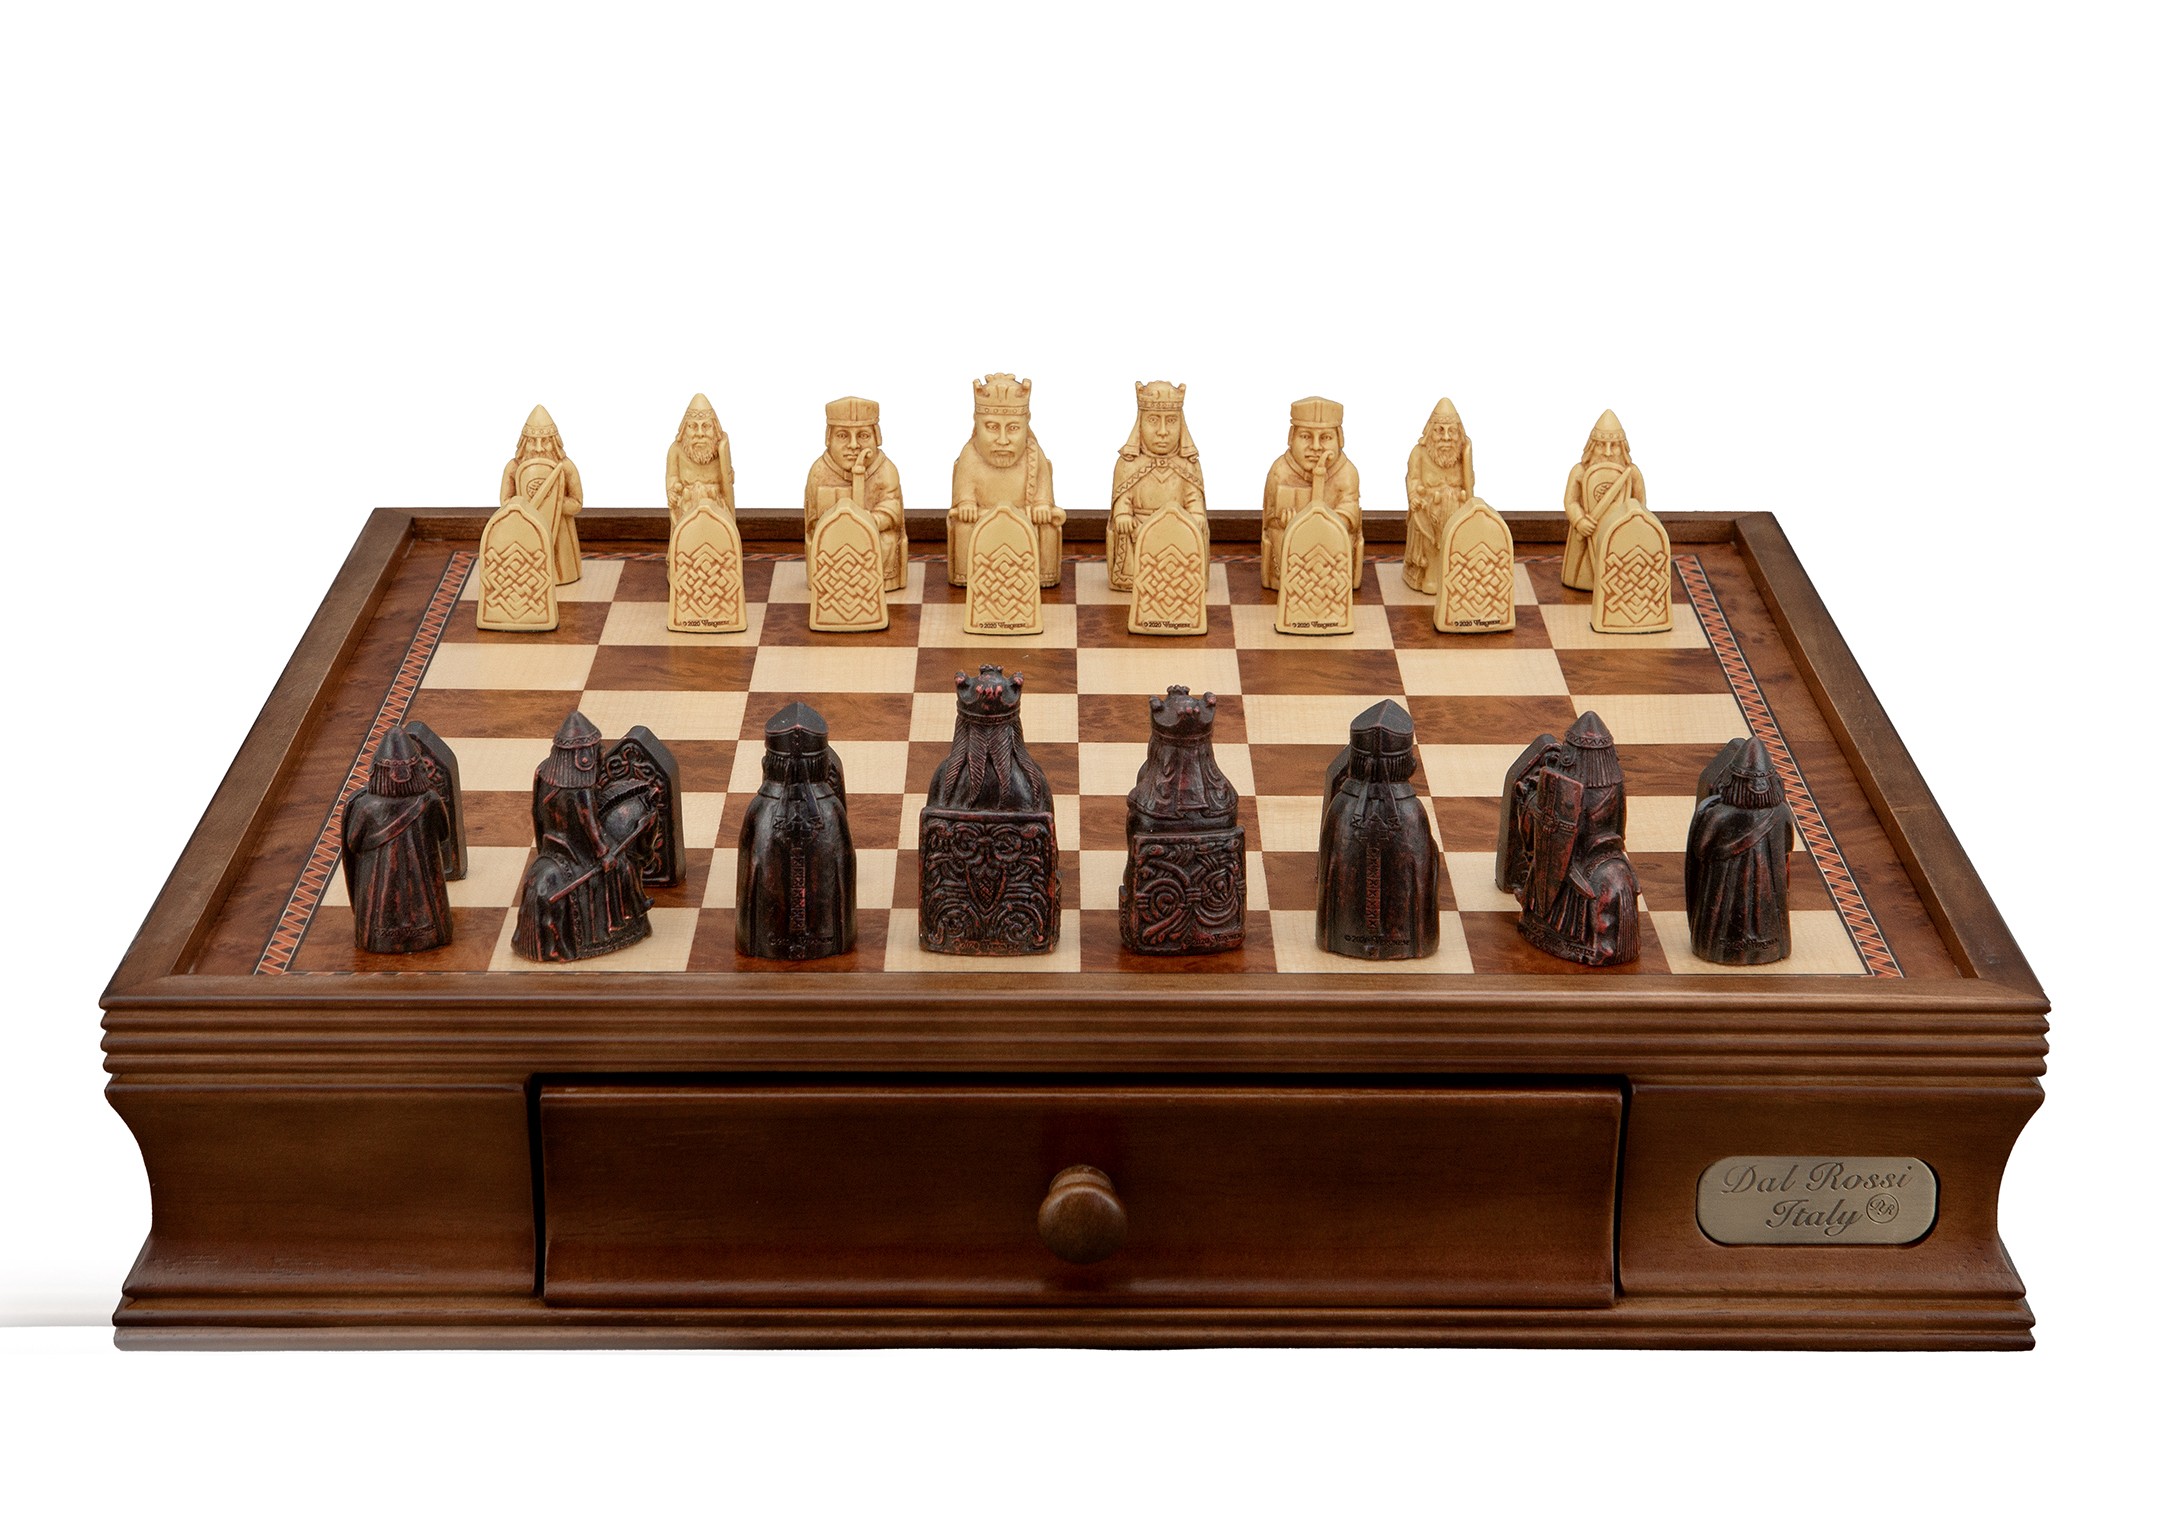 Dal Rossi Italy Isle of Lewis Chess Set with Drawers 16"